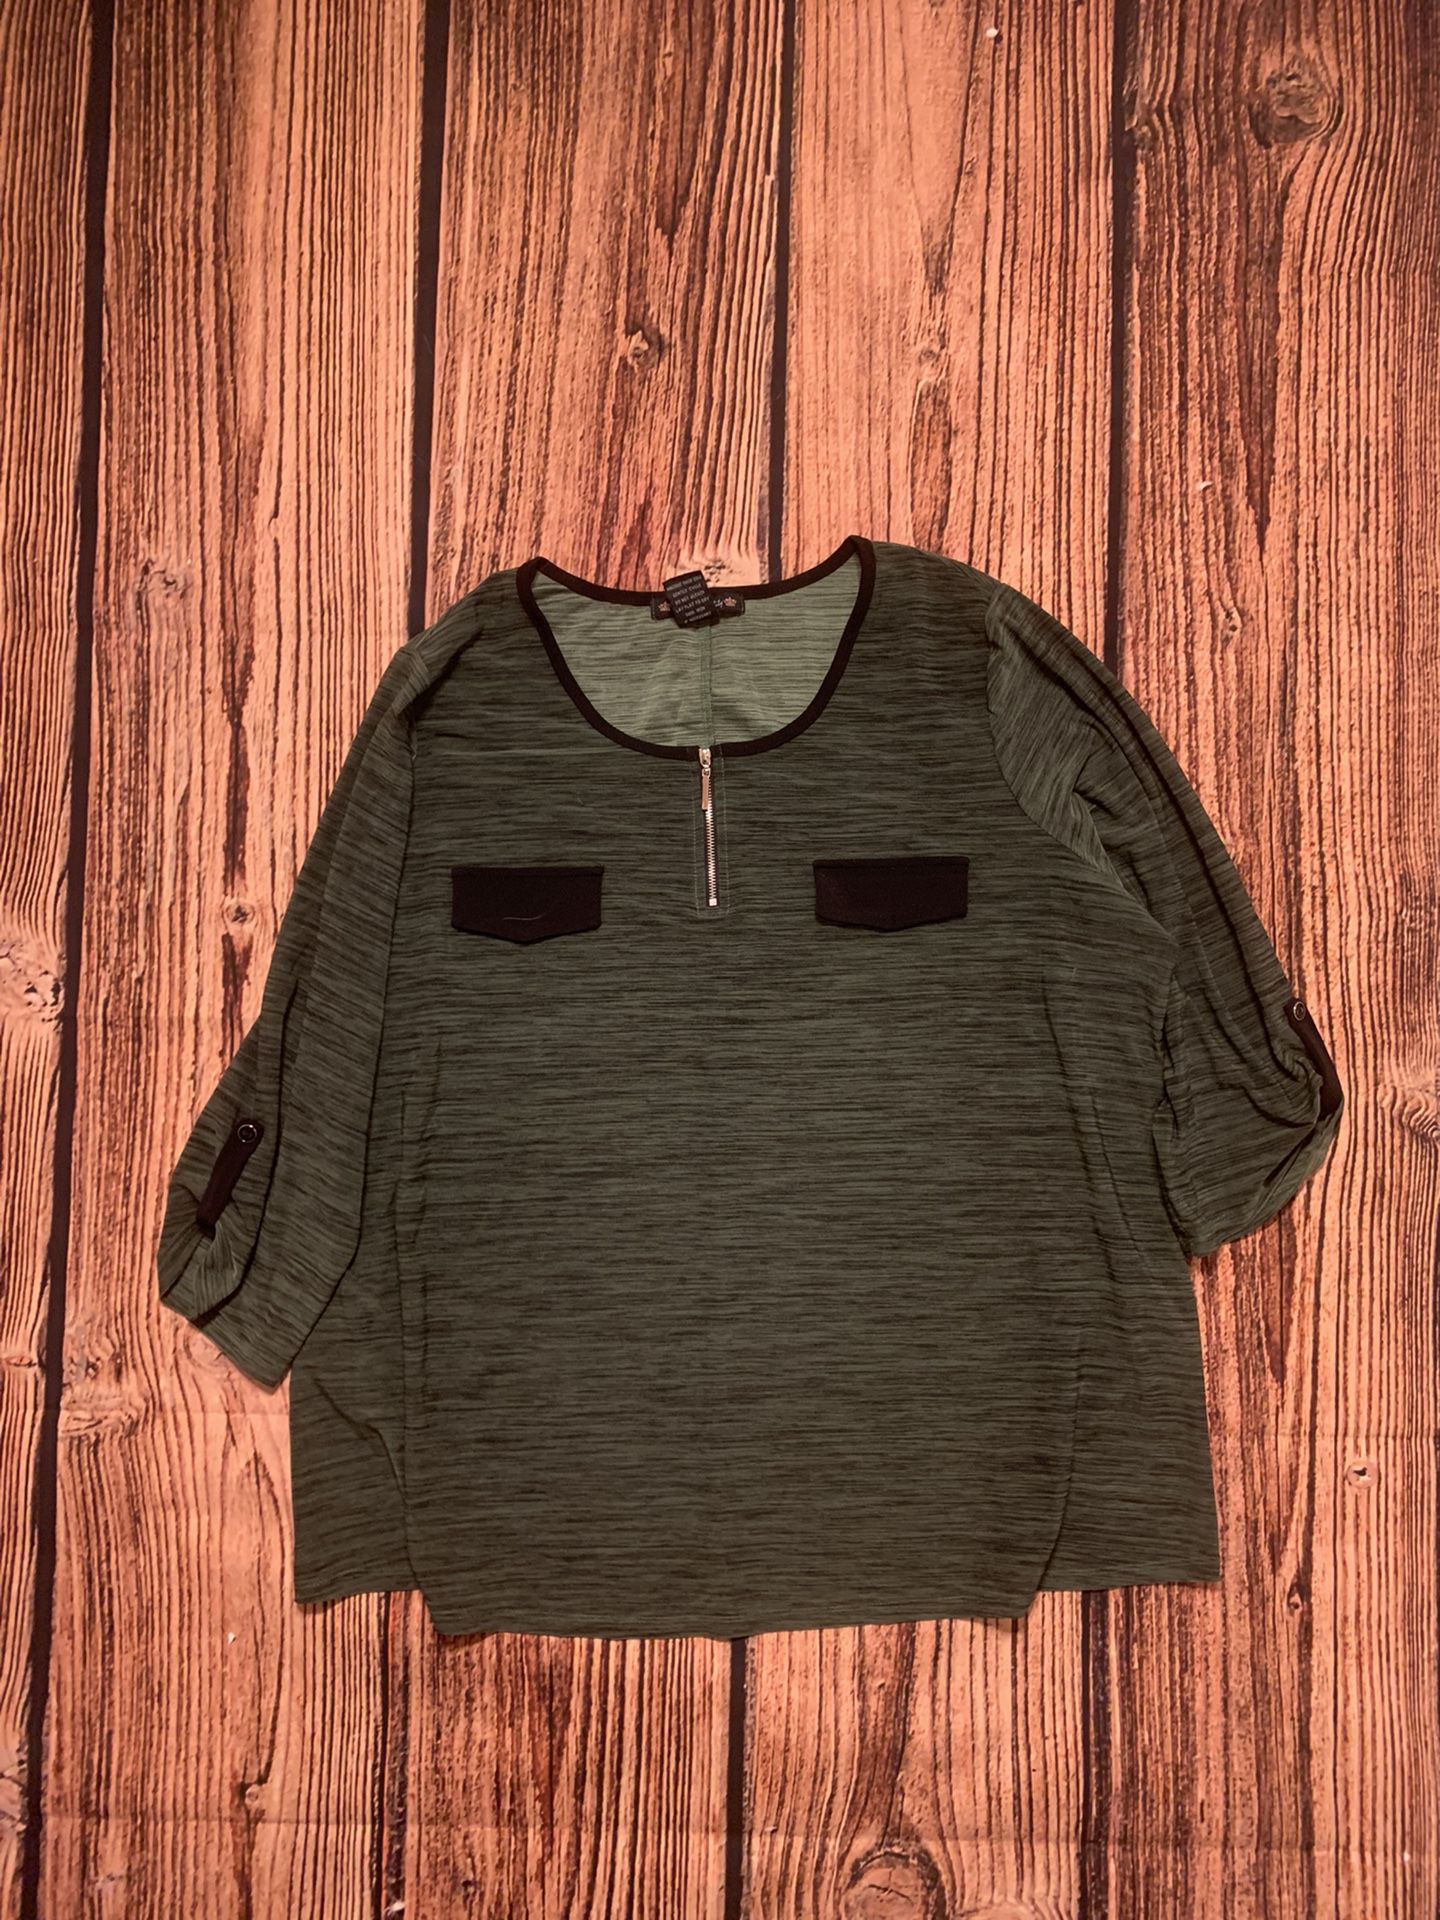 Women’s Green And Black Blouse 2XL